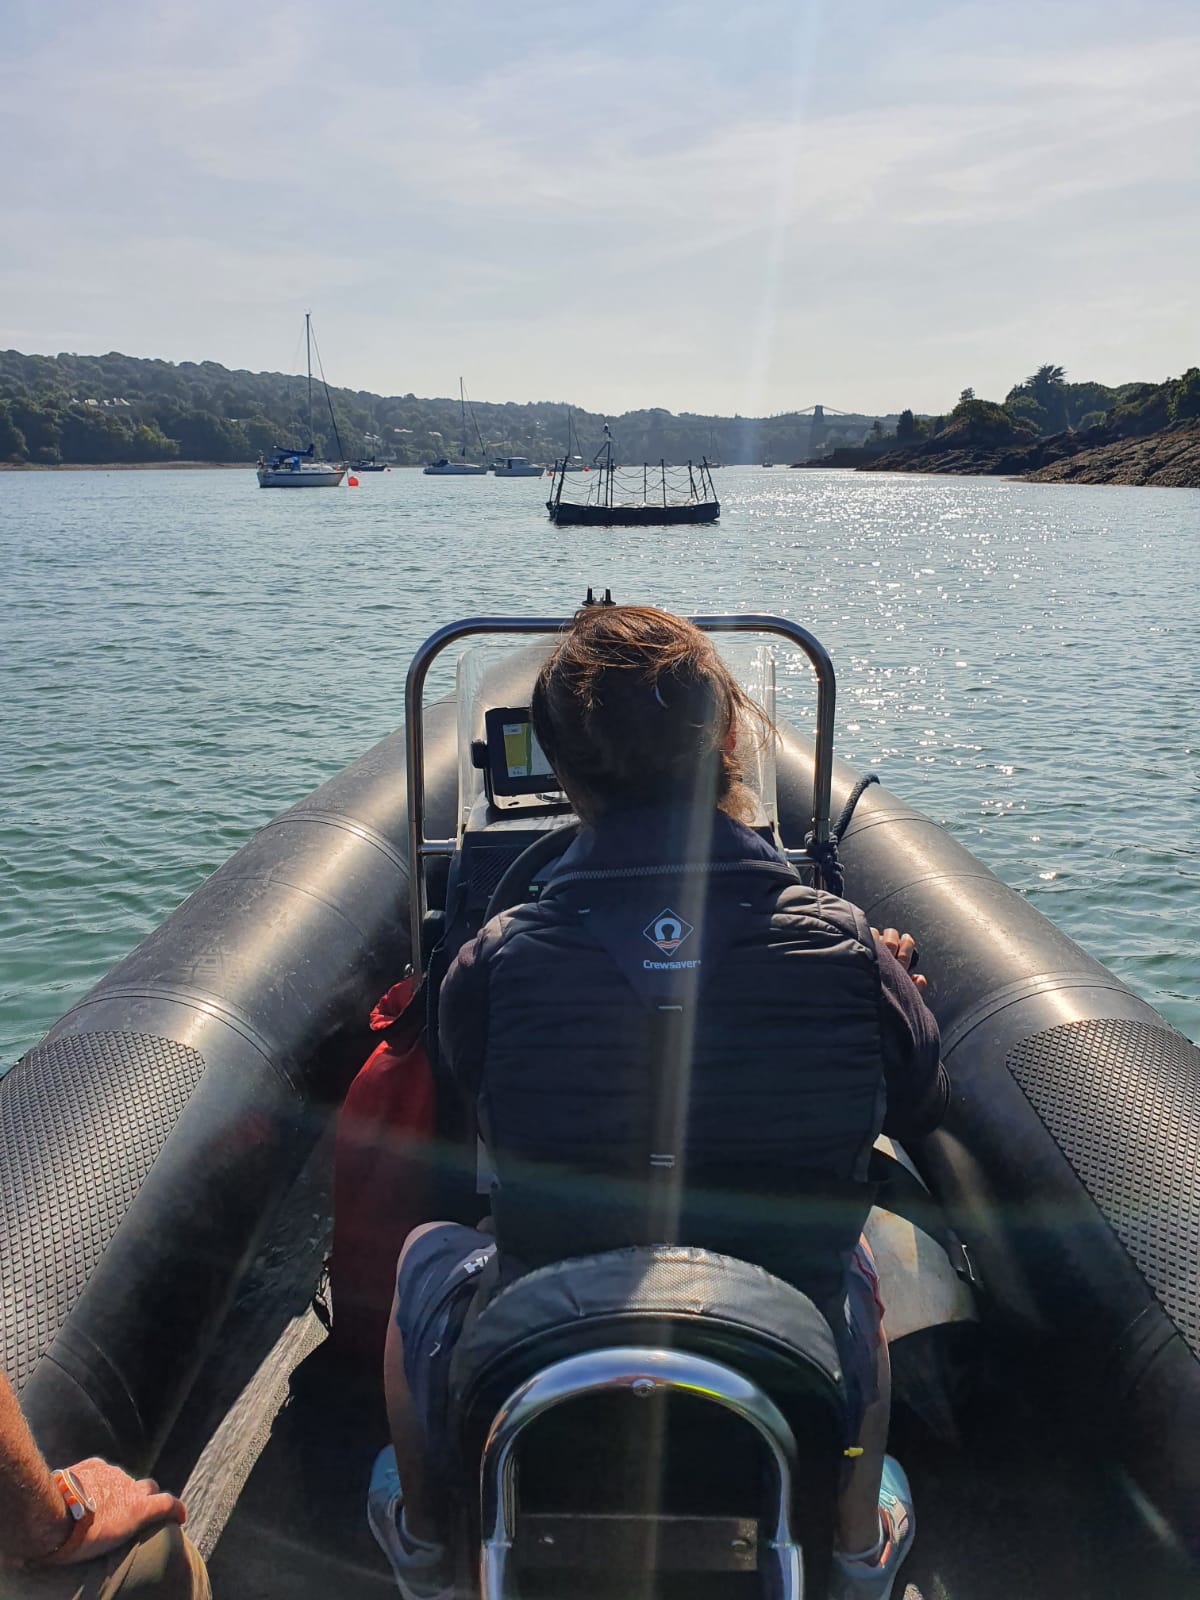 clare on a powerboat on the menai